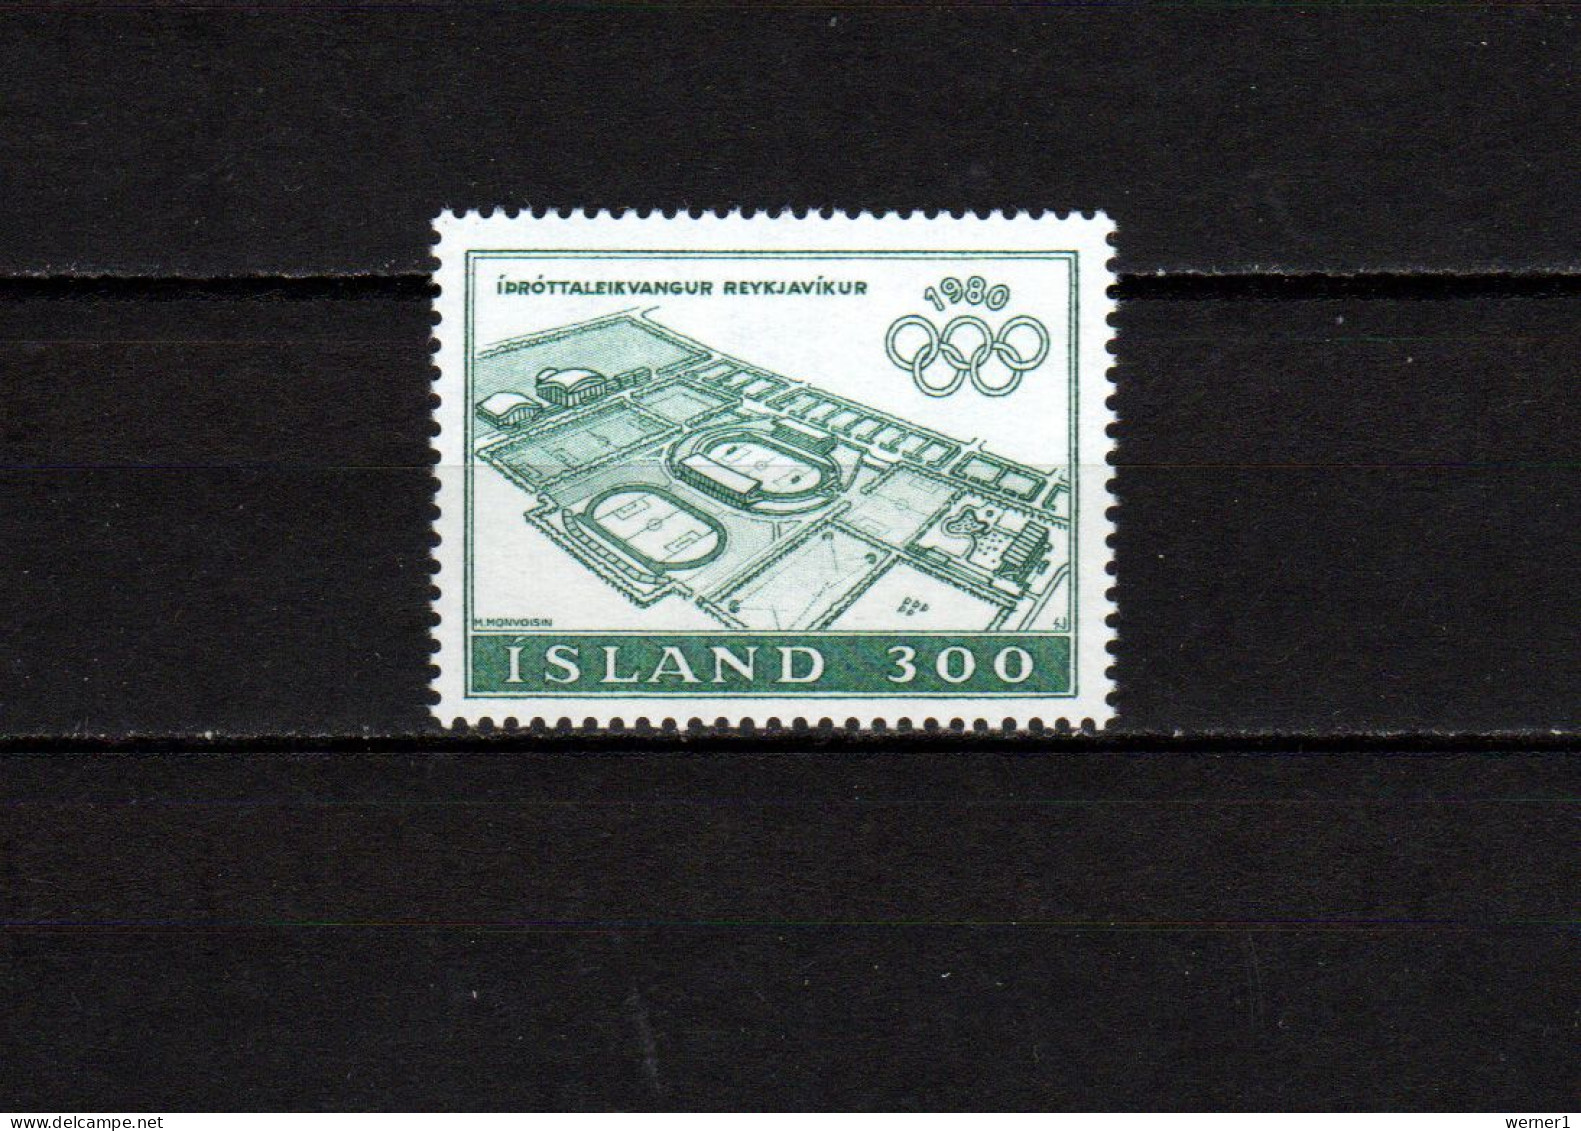 Iceland 1980 Olympic Games Moscow Stamp MNH - Verano 1980: Moscu